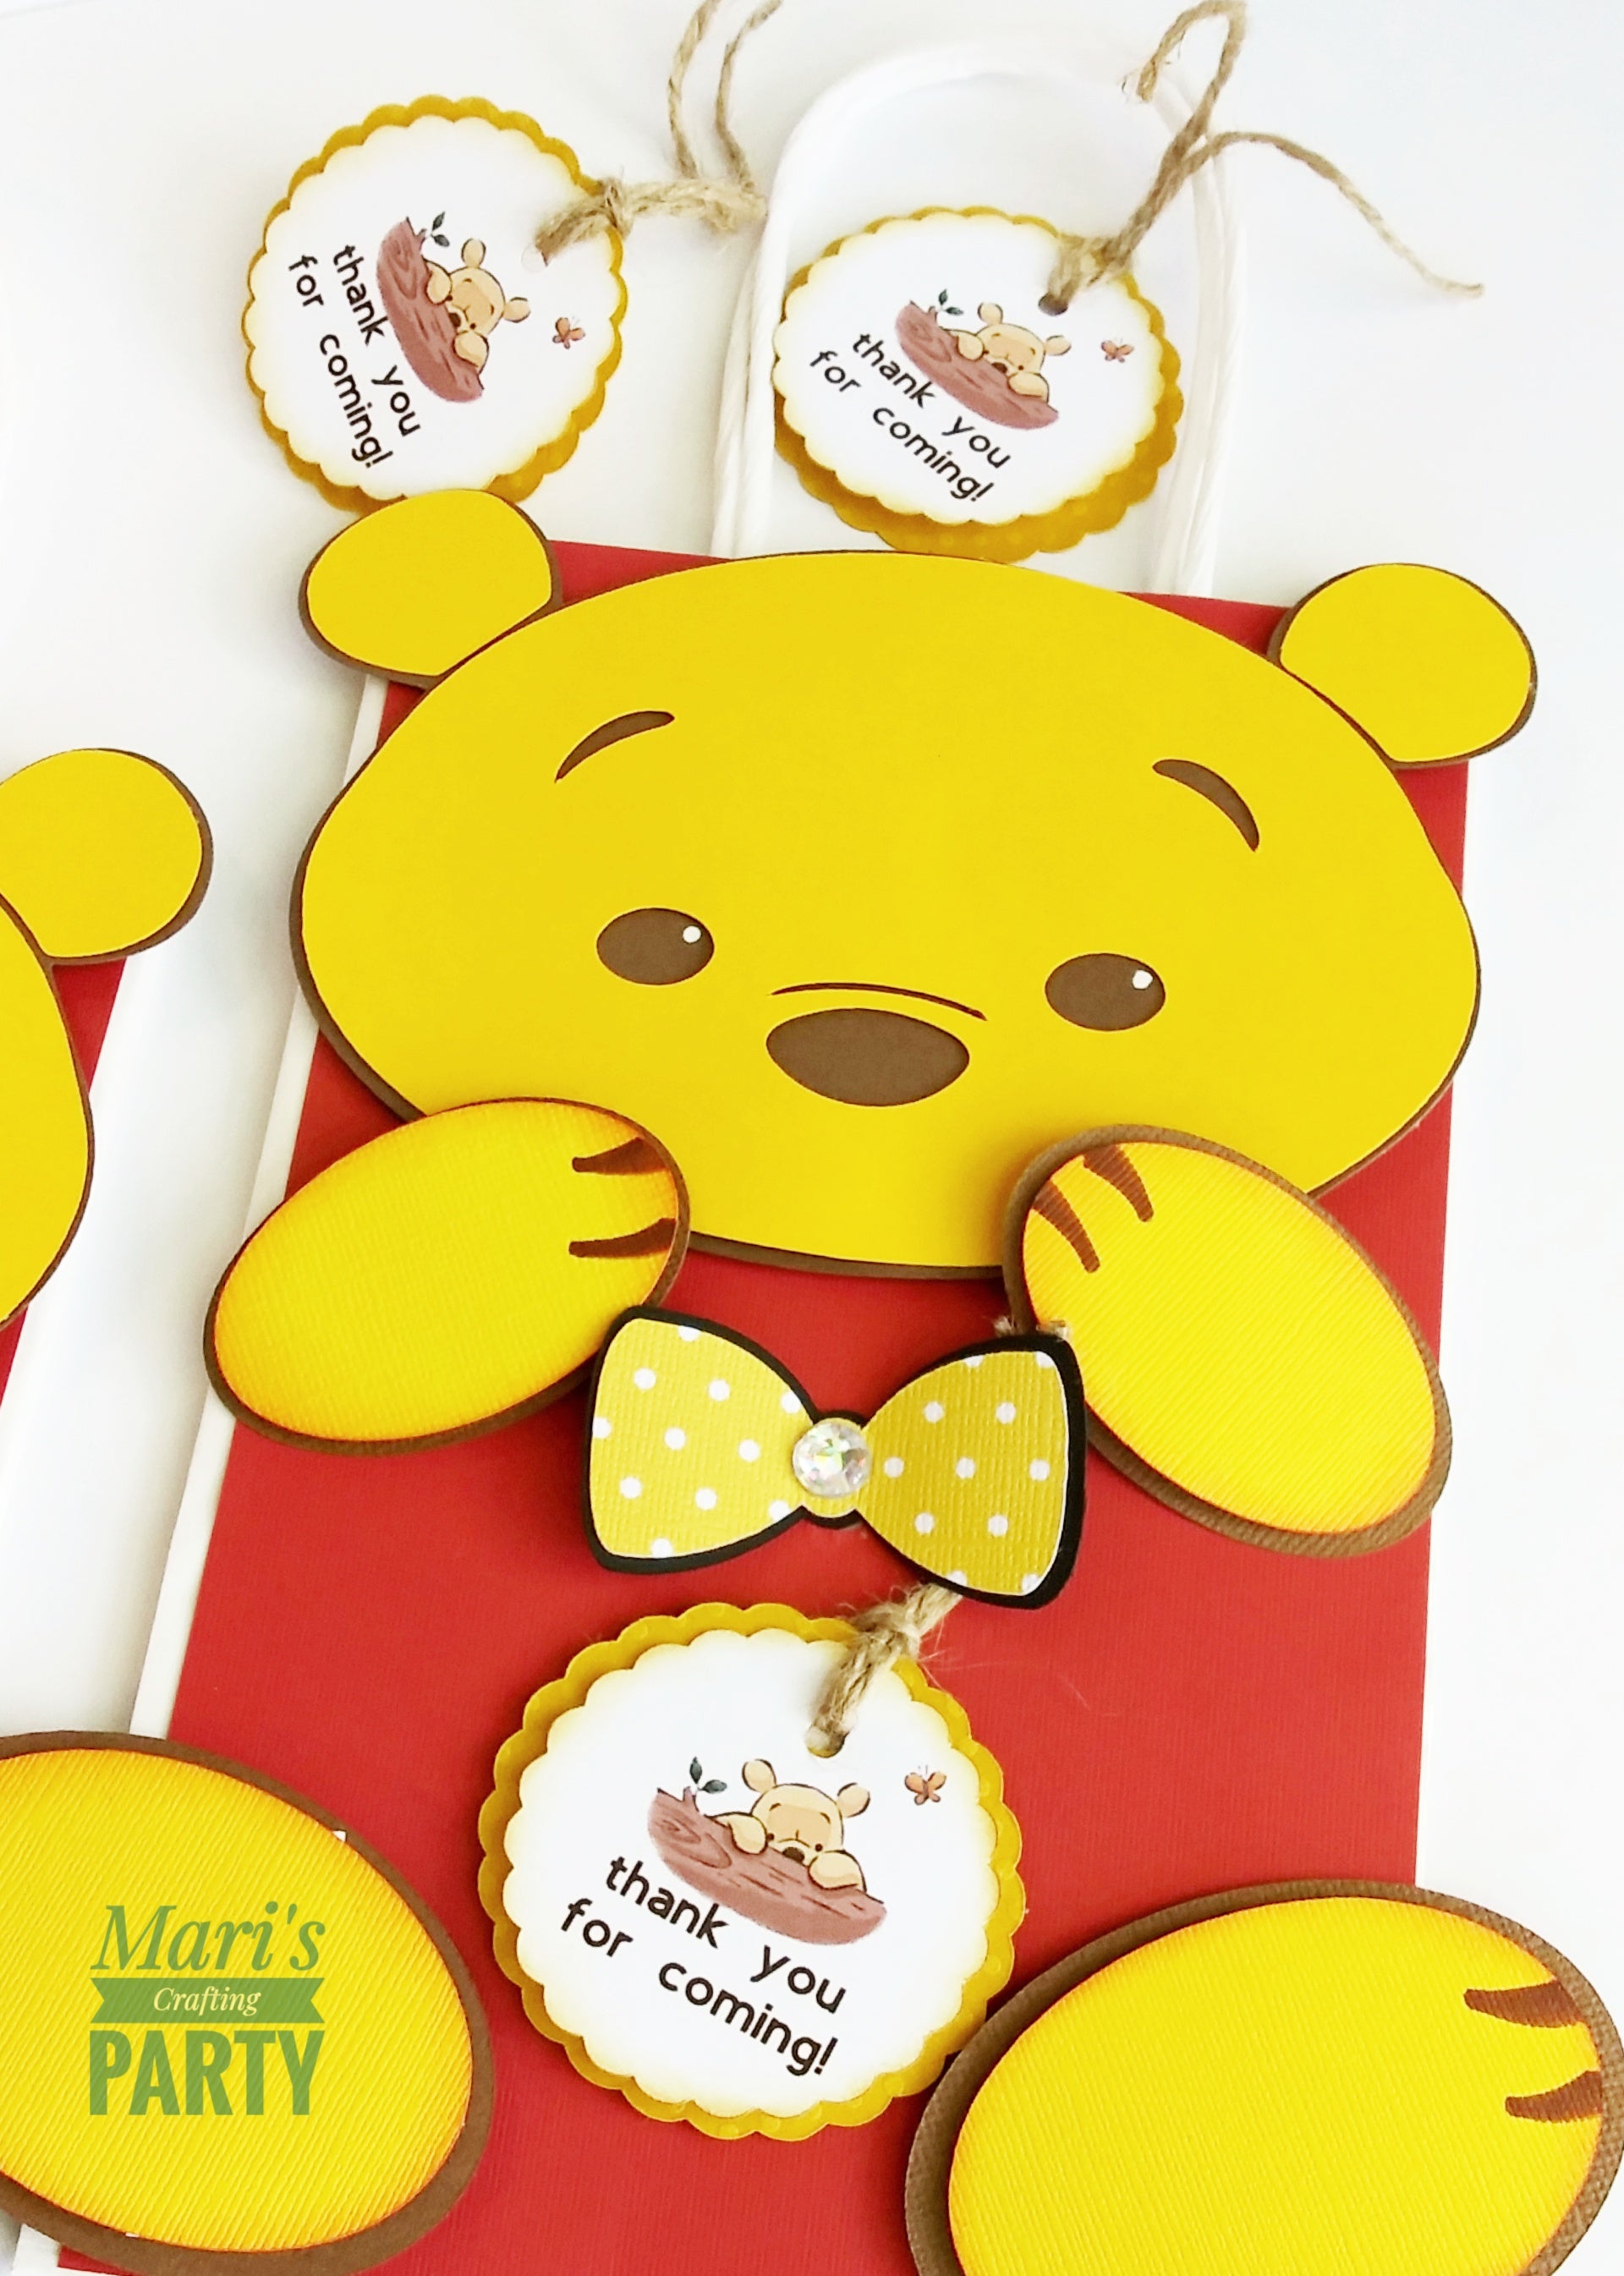 Winnie the Pooh Party Favors  Wear in Winnie the Pooh Party Supplies   Walmartcom